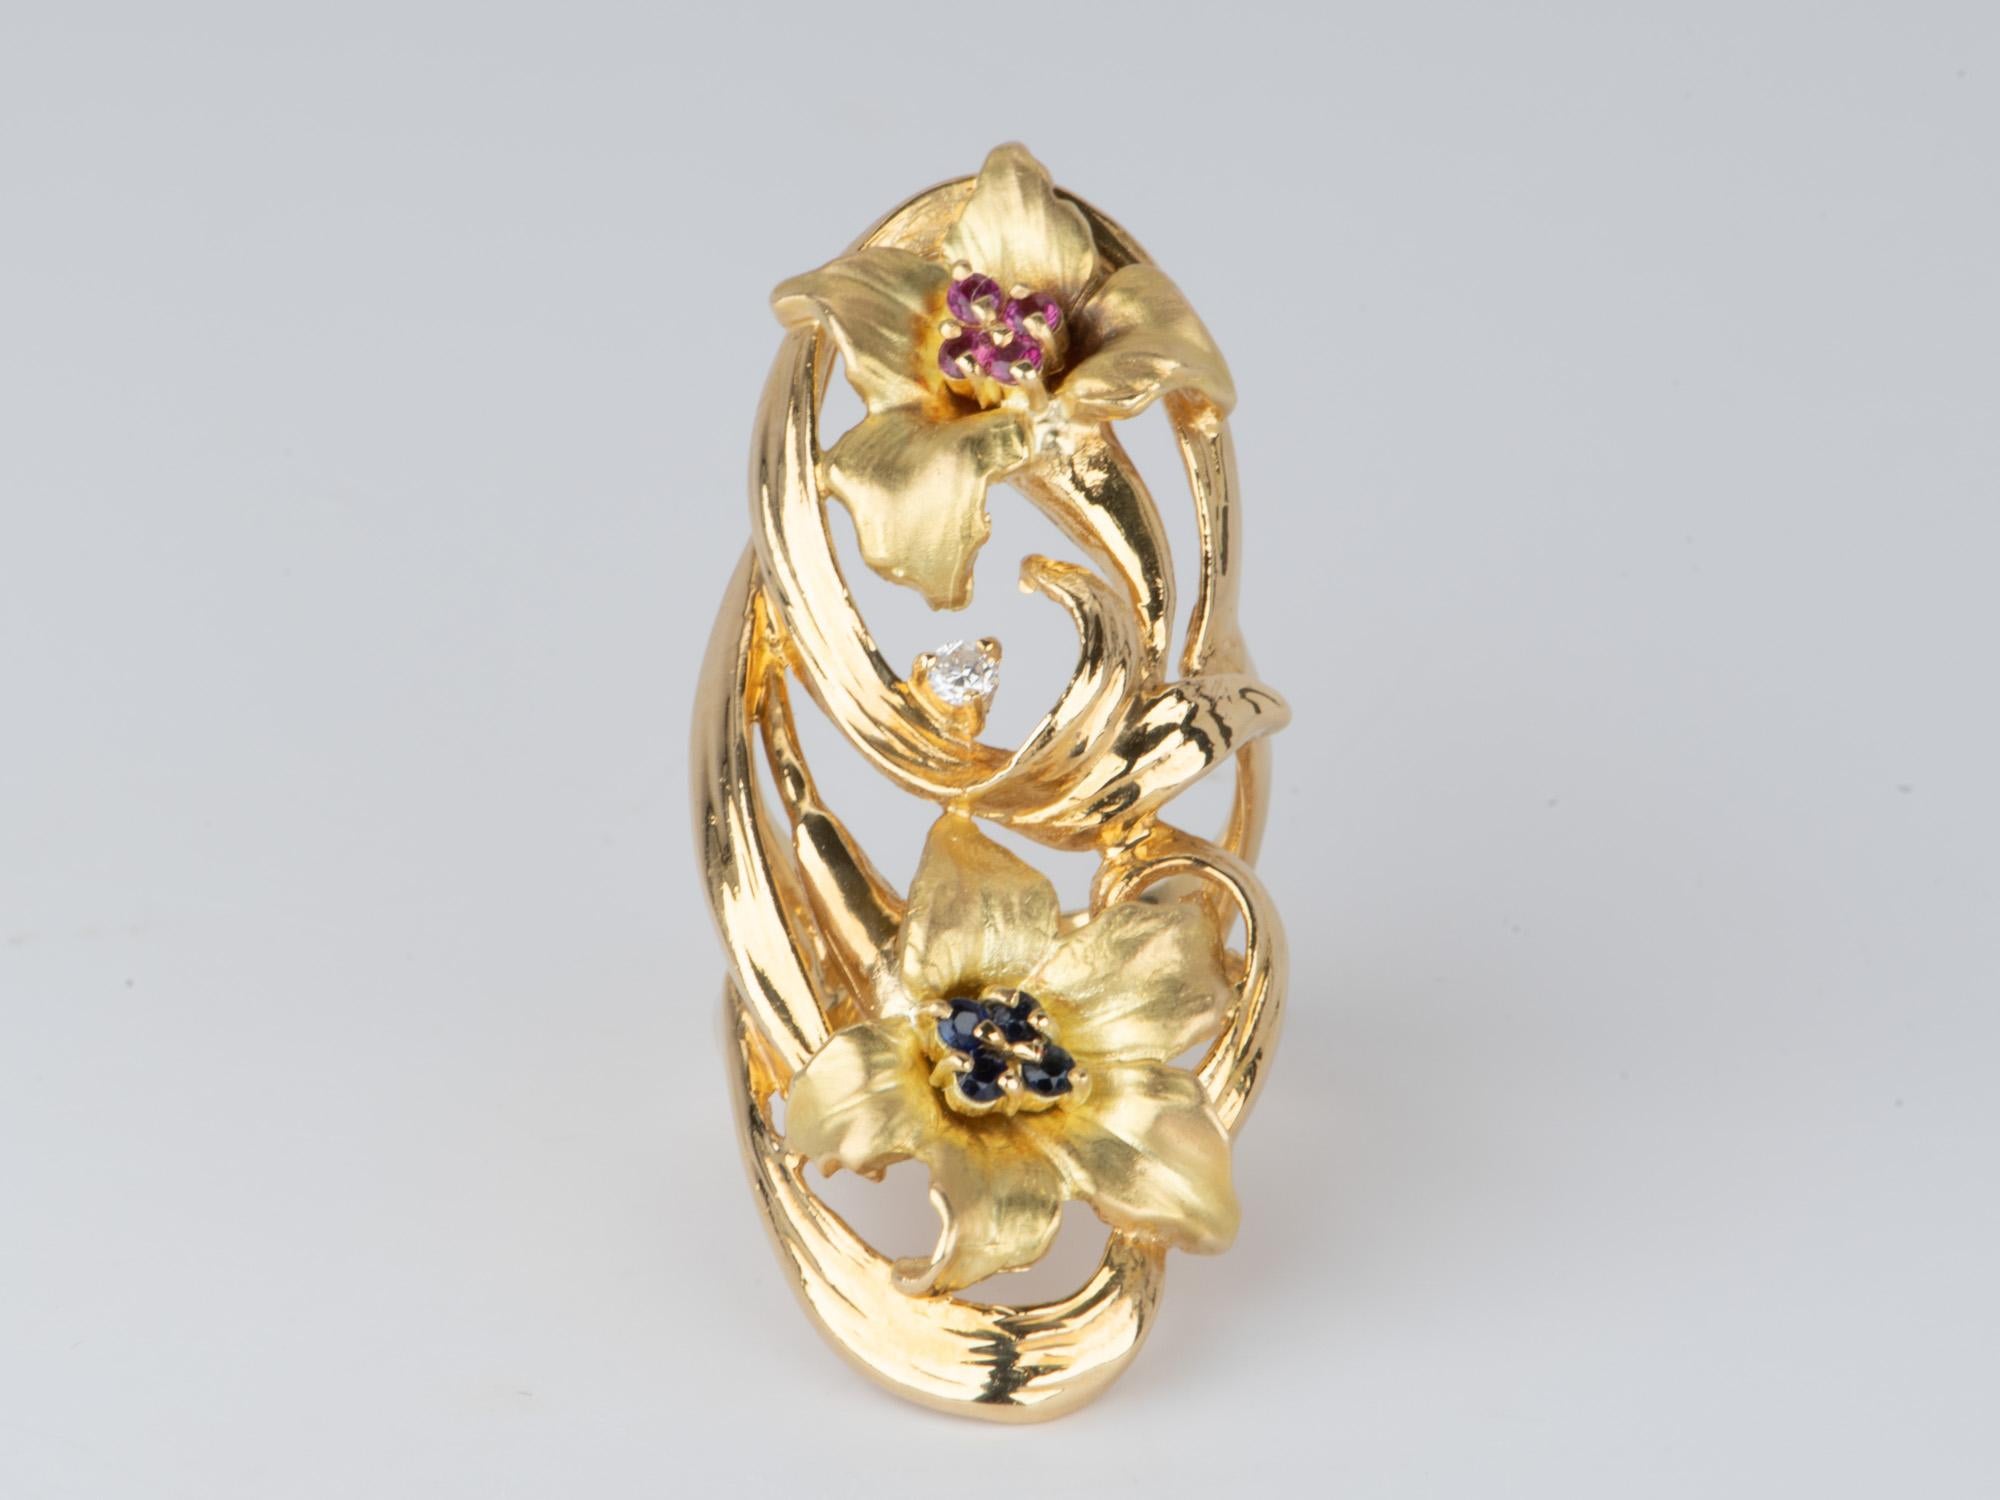 Make a statement with this bold, 18K gold navette-style ring, featuring a vibrant elongated floral design and clusters of rubies, sapphires, and diamonds. The elongated design and heavy gold allows the ring to hug your finger so nicely. Be the envy